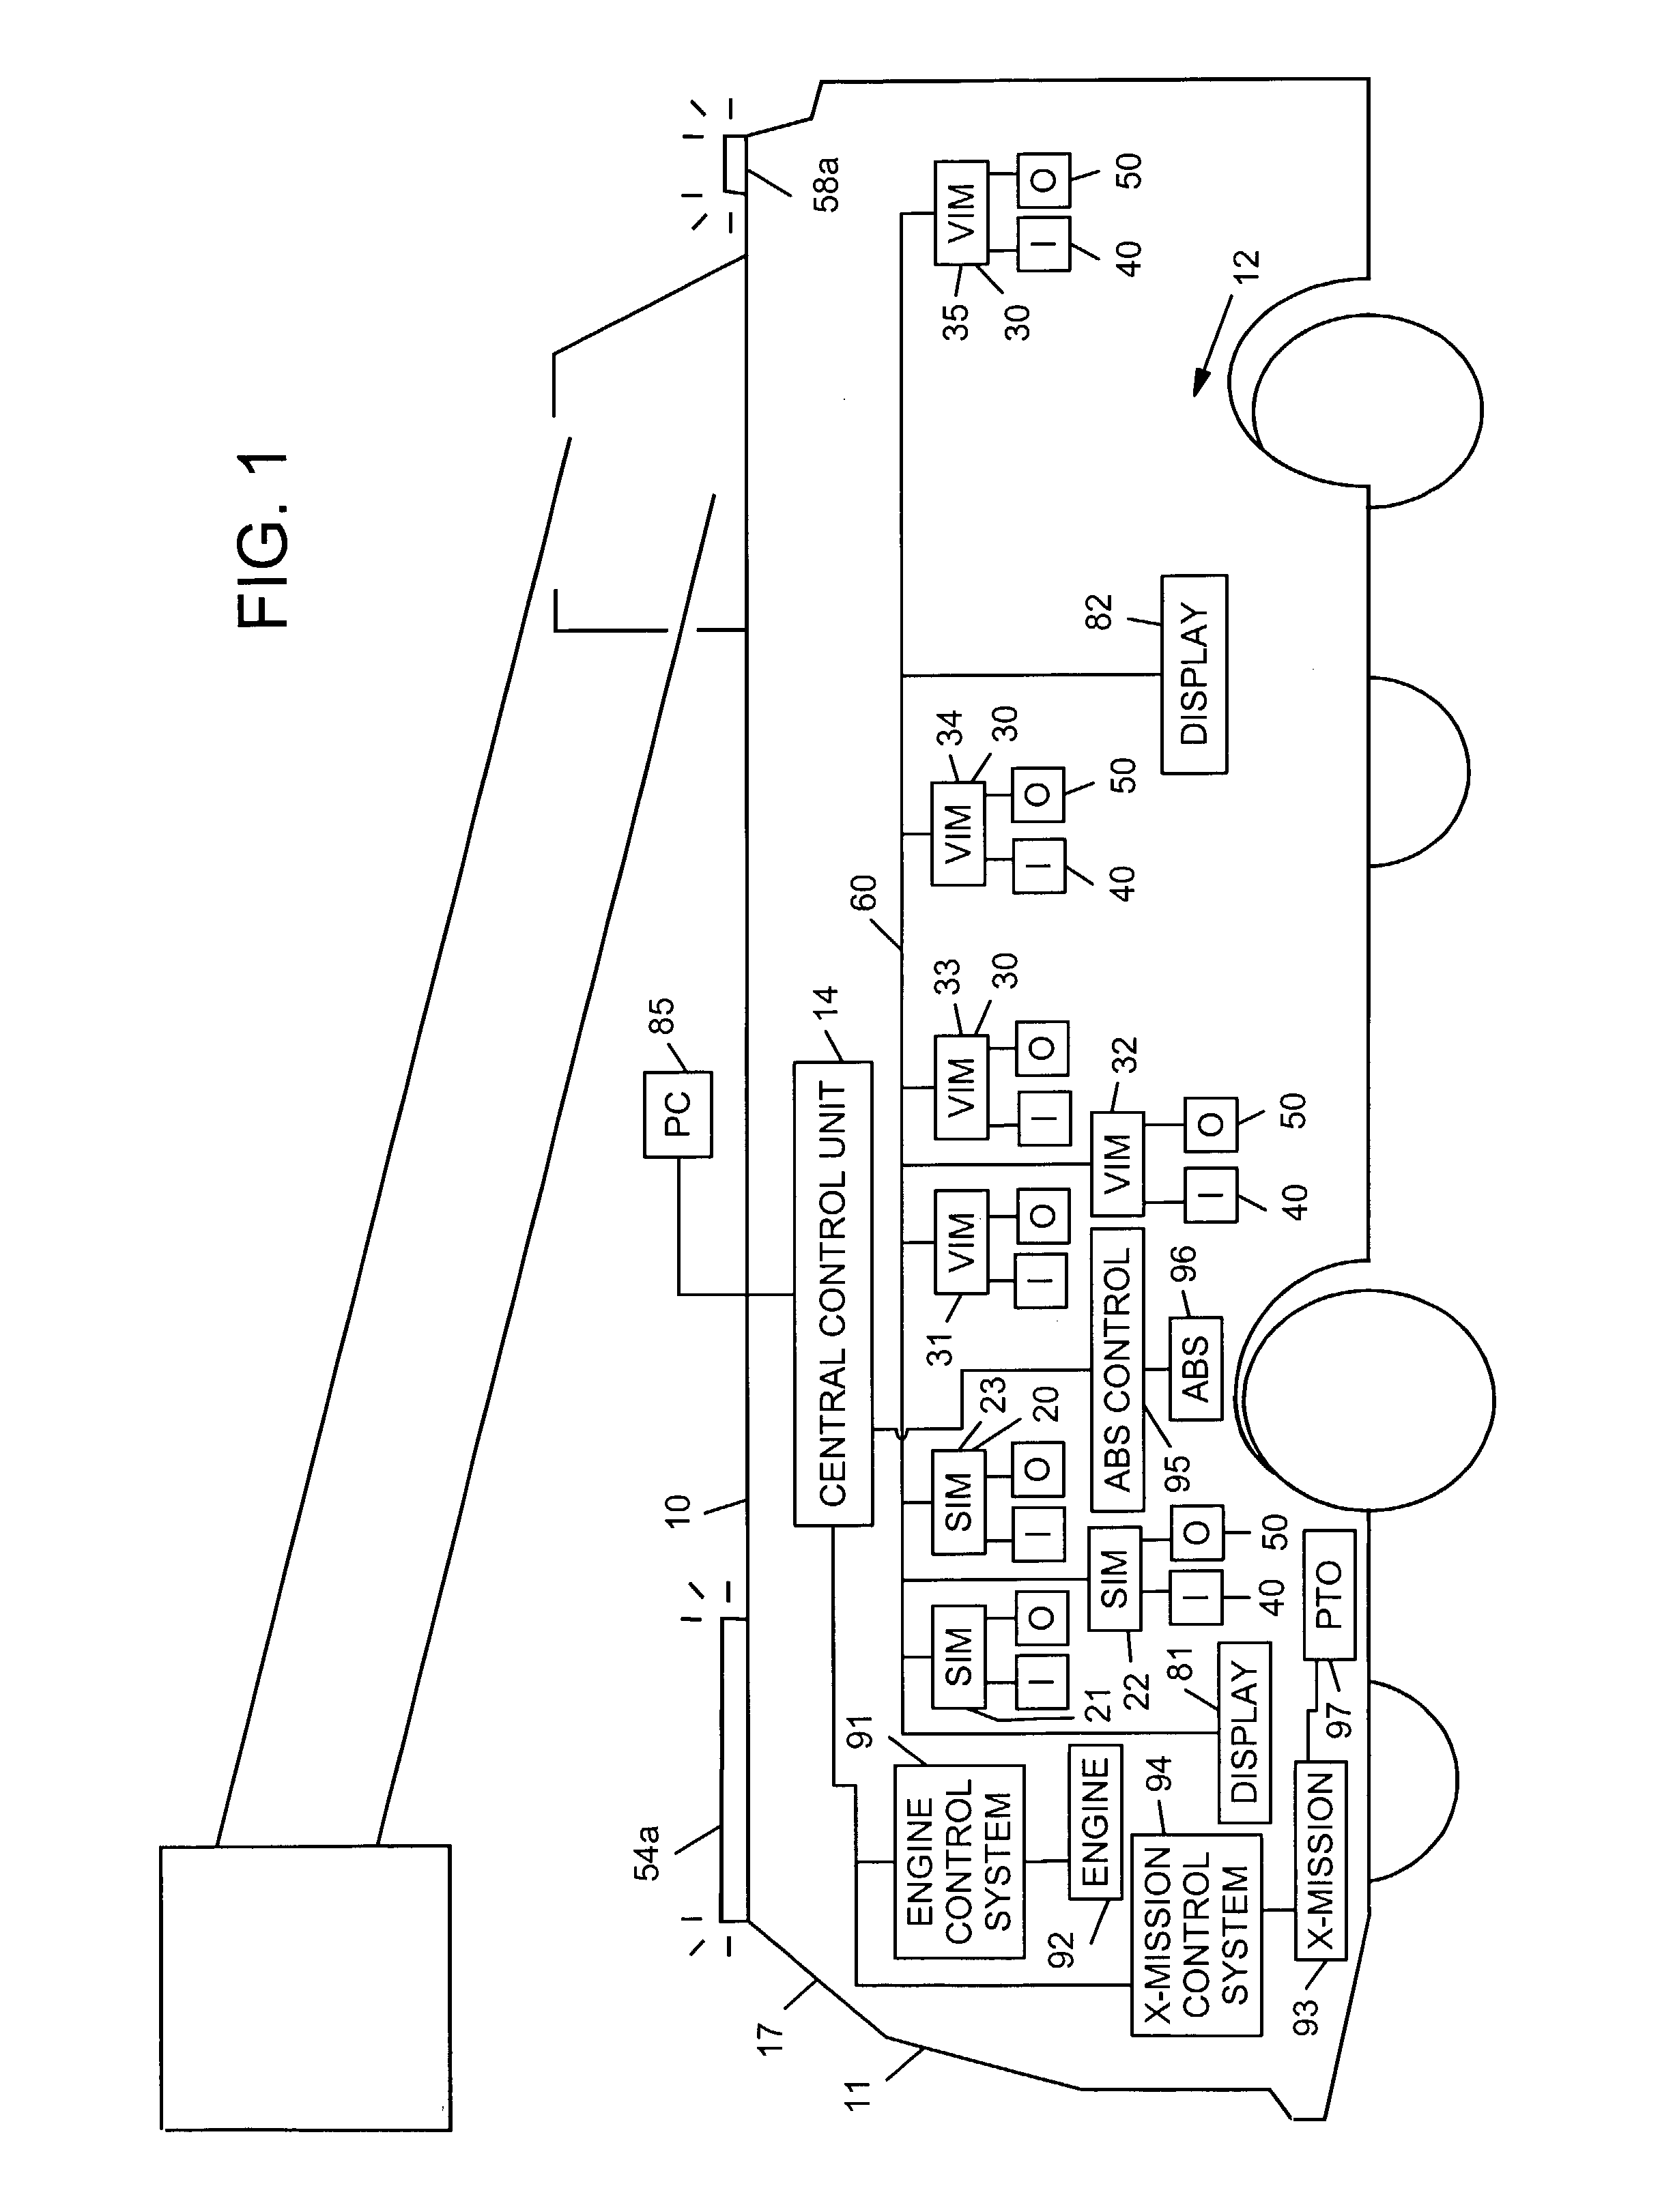 Control system and method for an equipment service vehicle